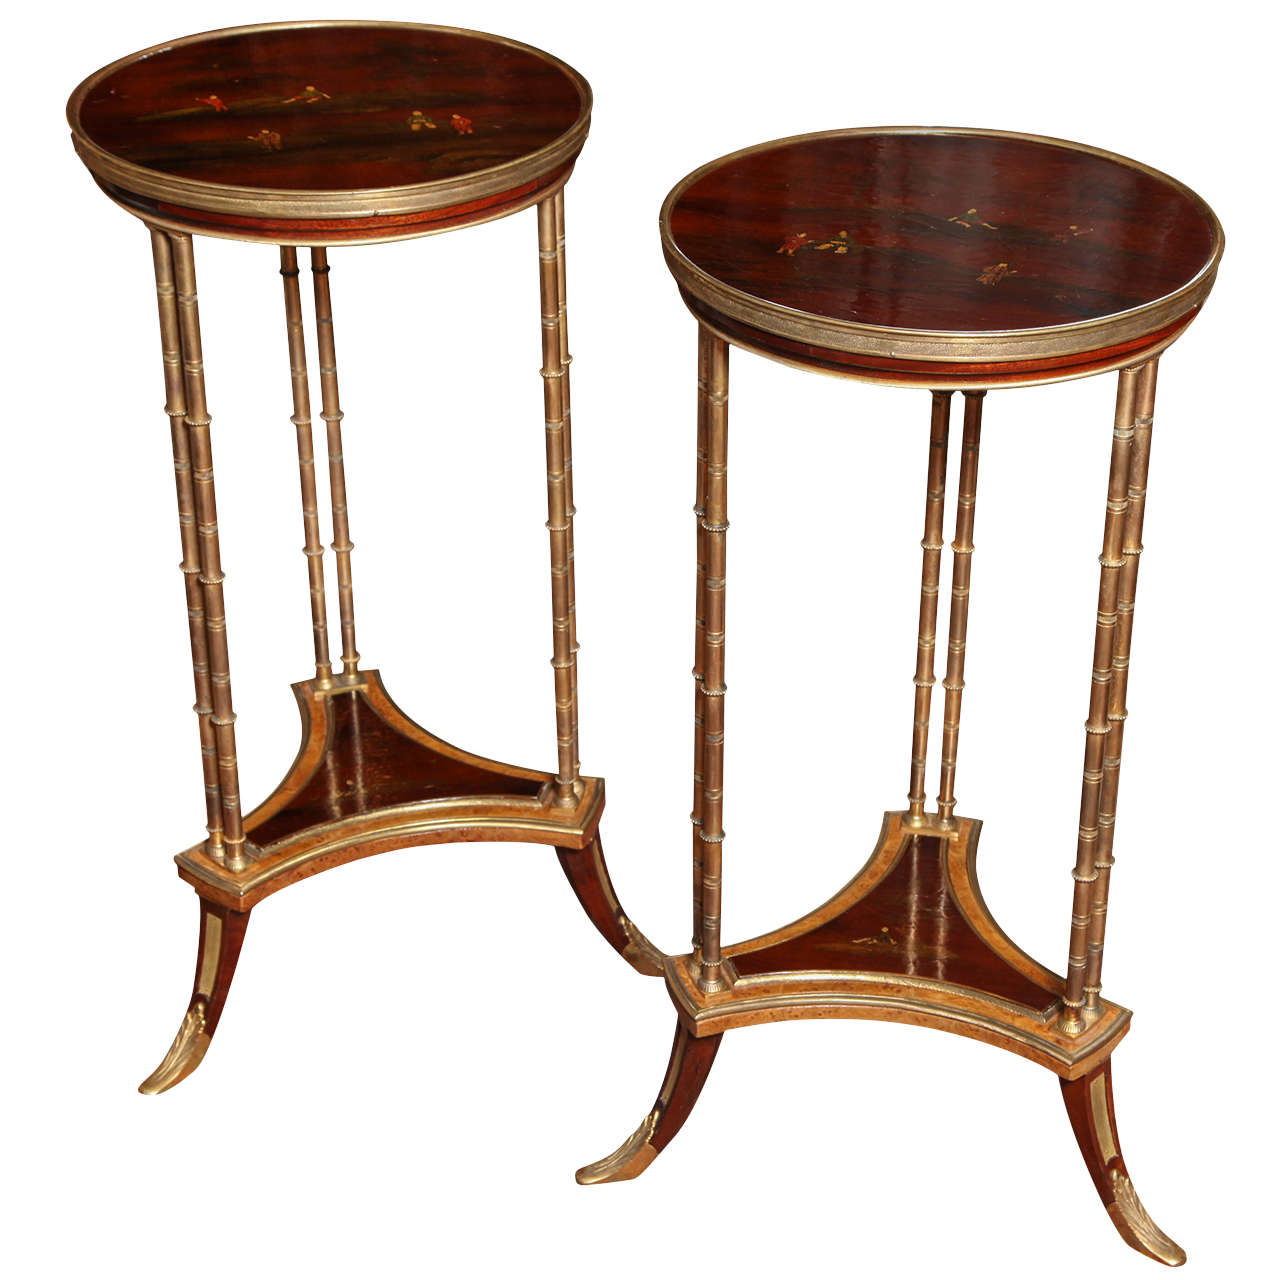 Pair of French Bronze and Lacquer Gueridon Tables